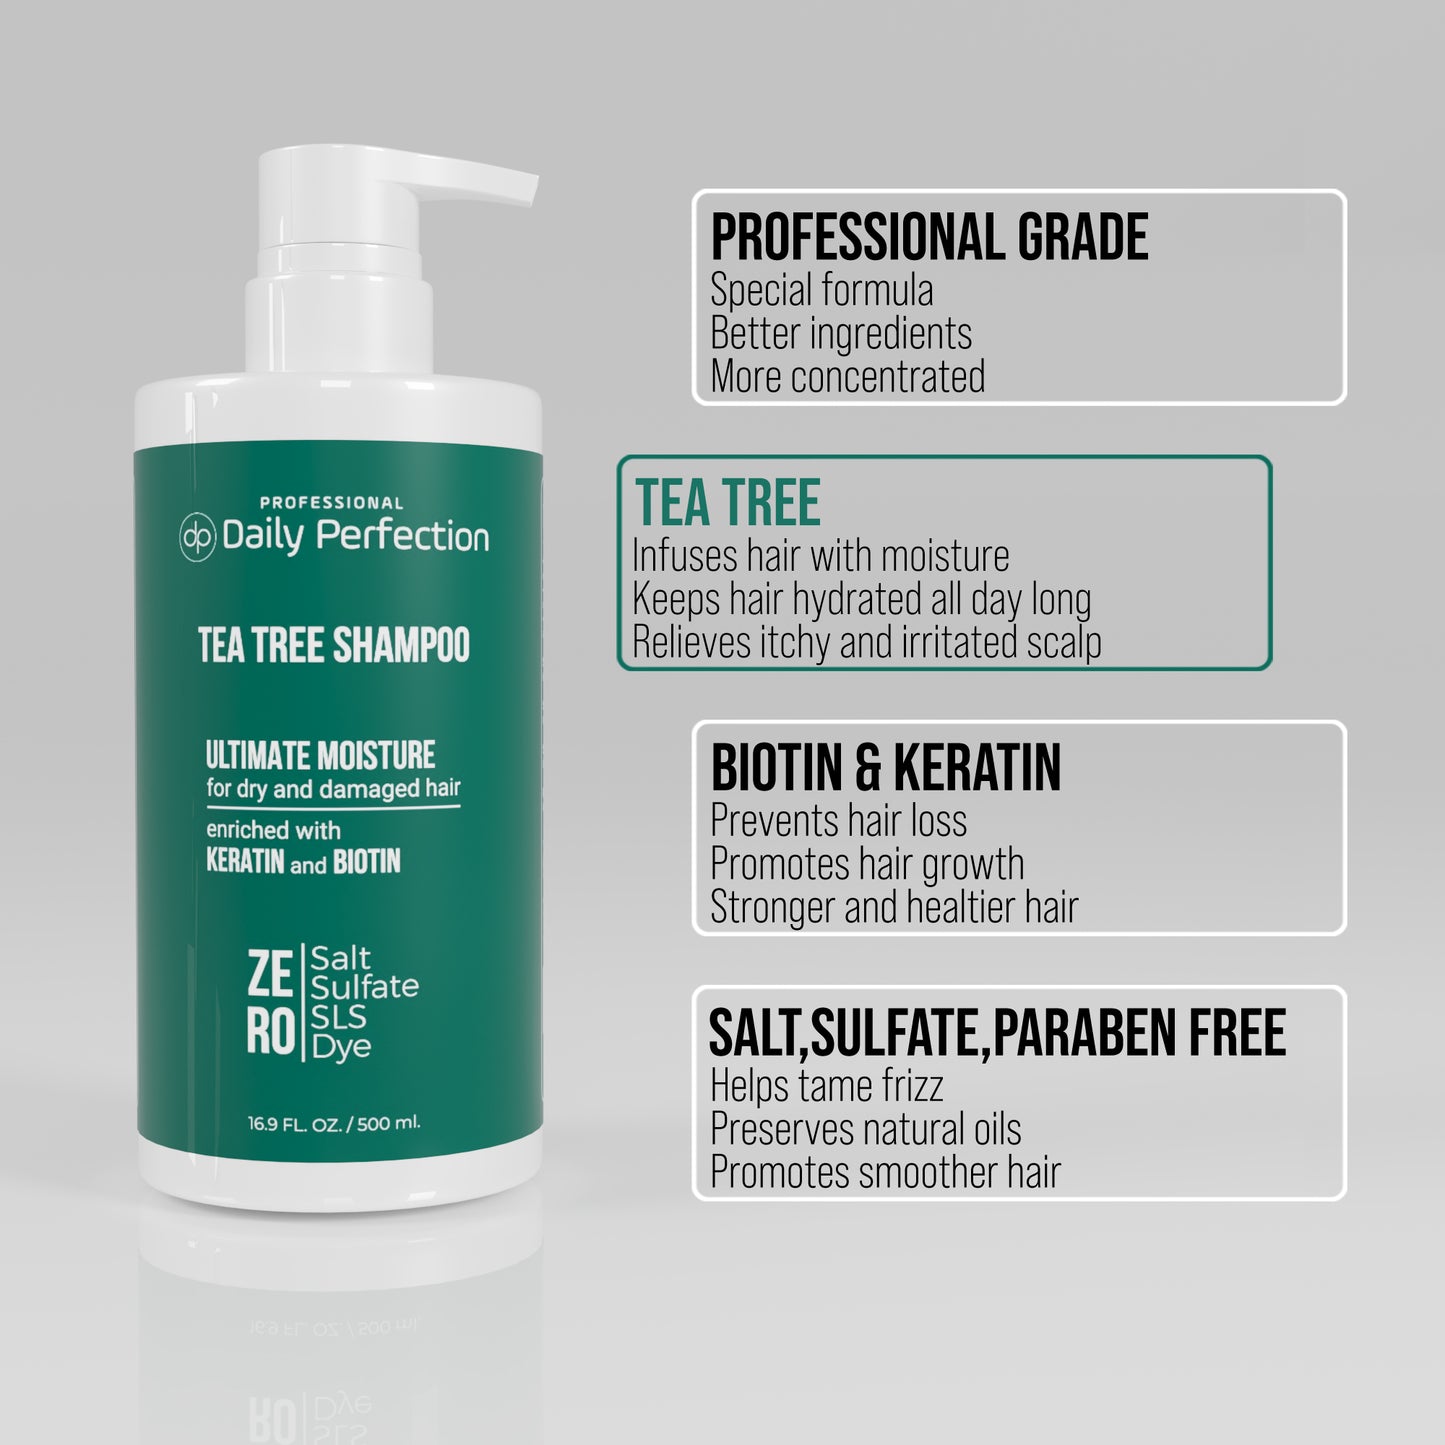 Daily Perfection Tea-Tree Shampoo infographic explains the product benefits in four bullet points